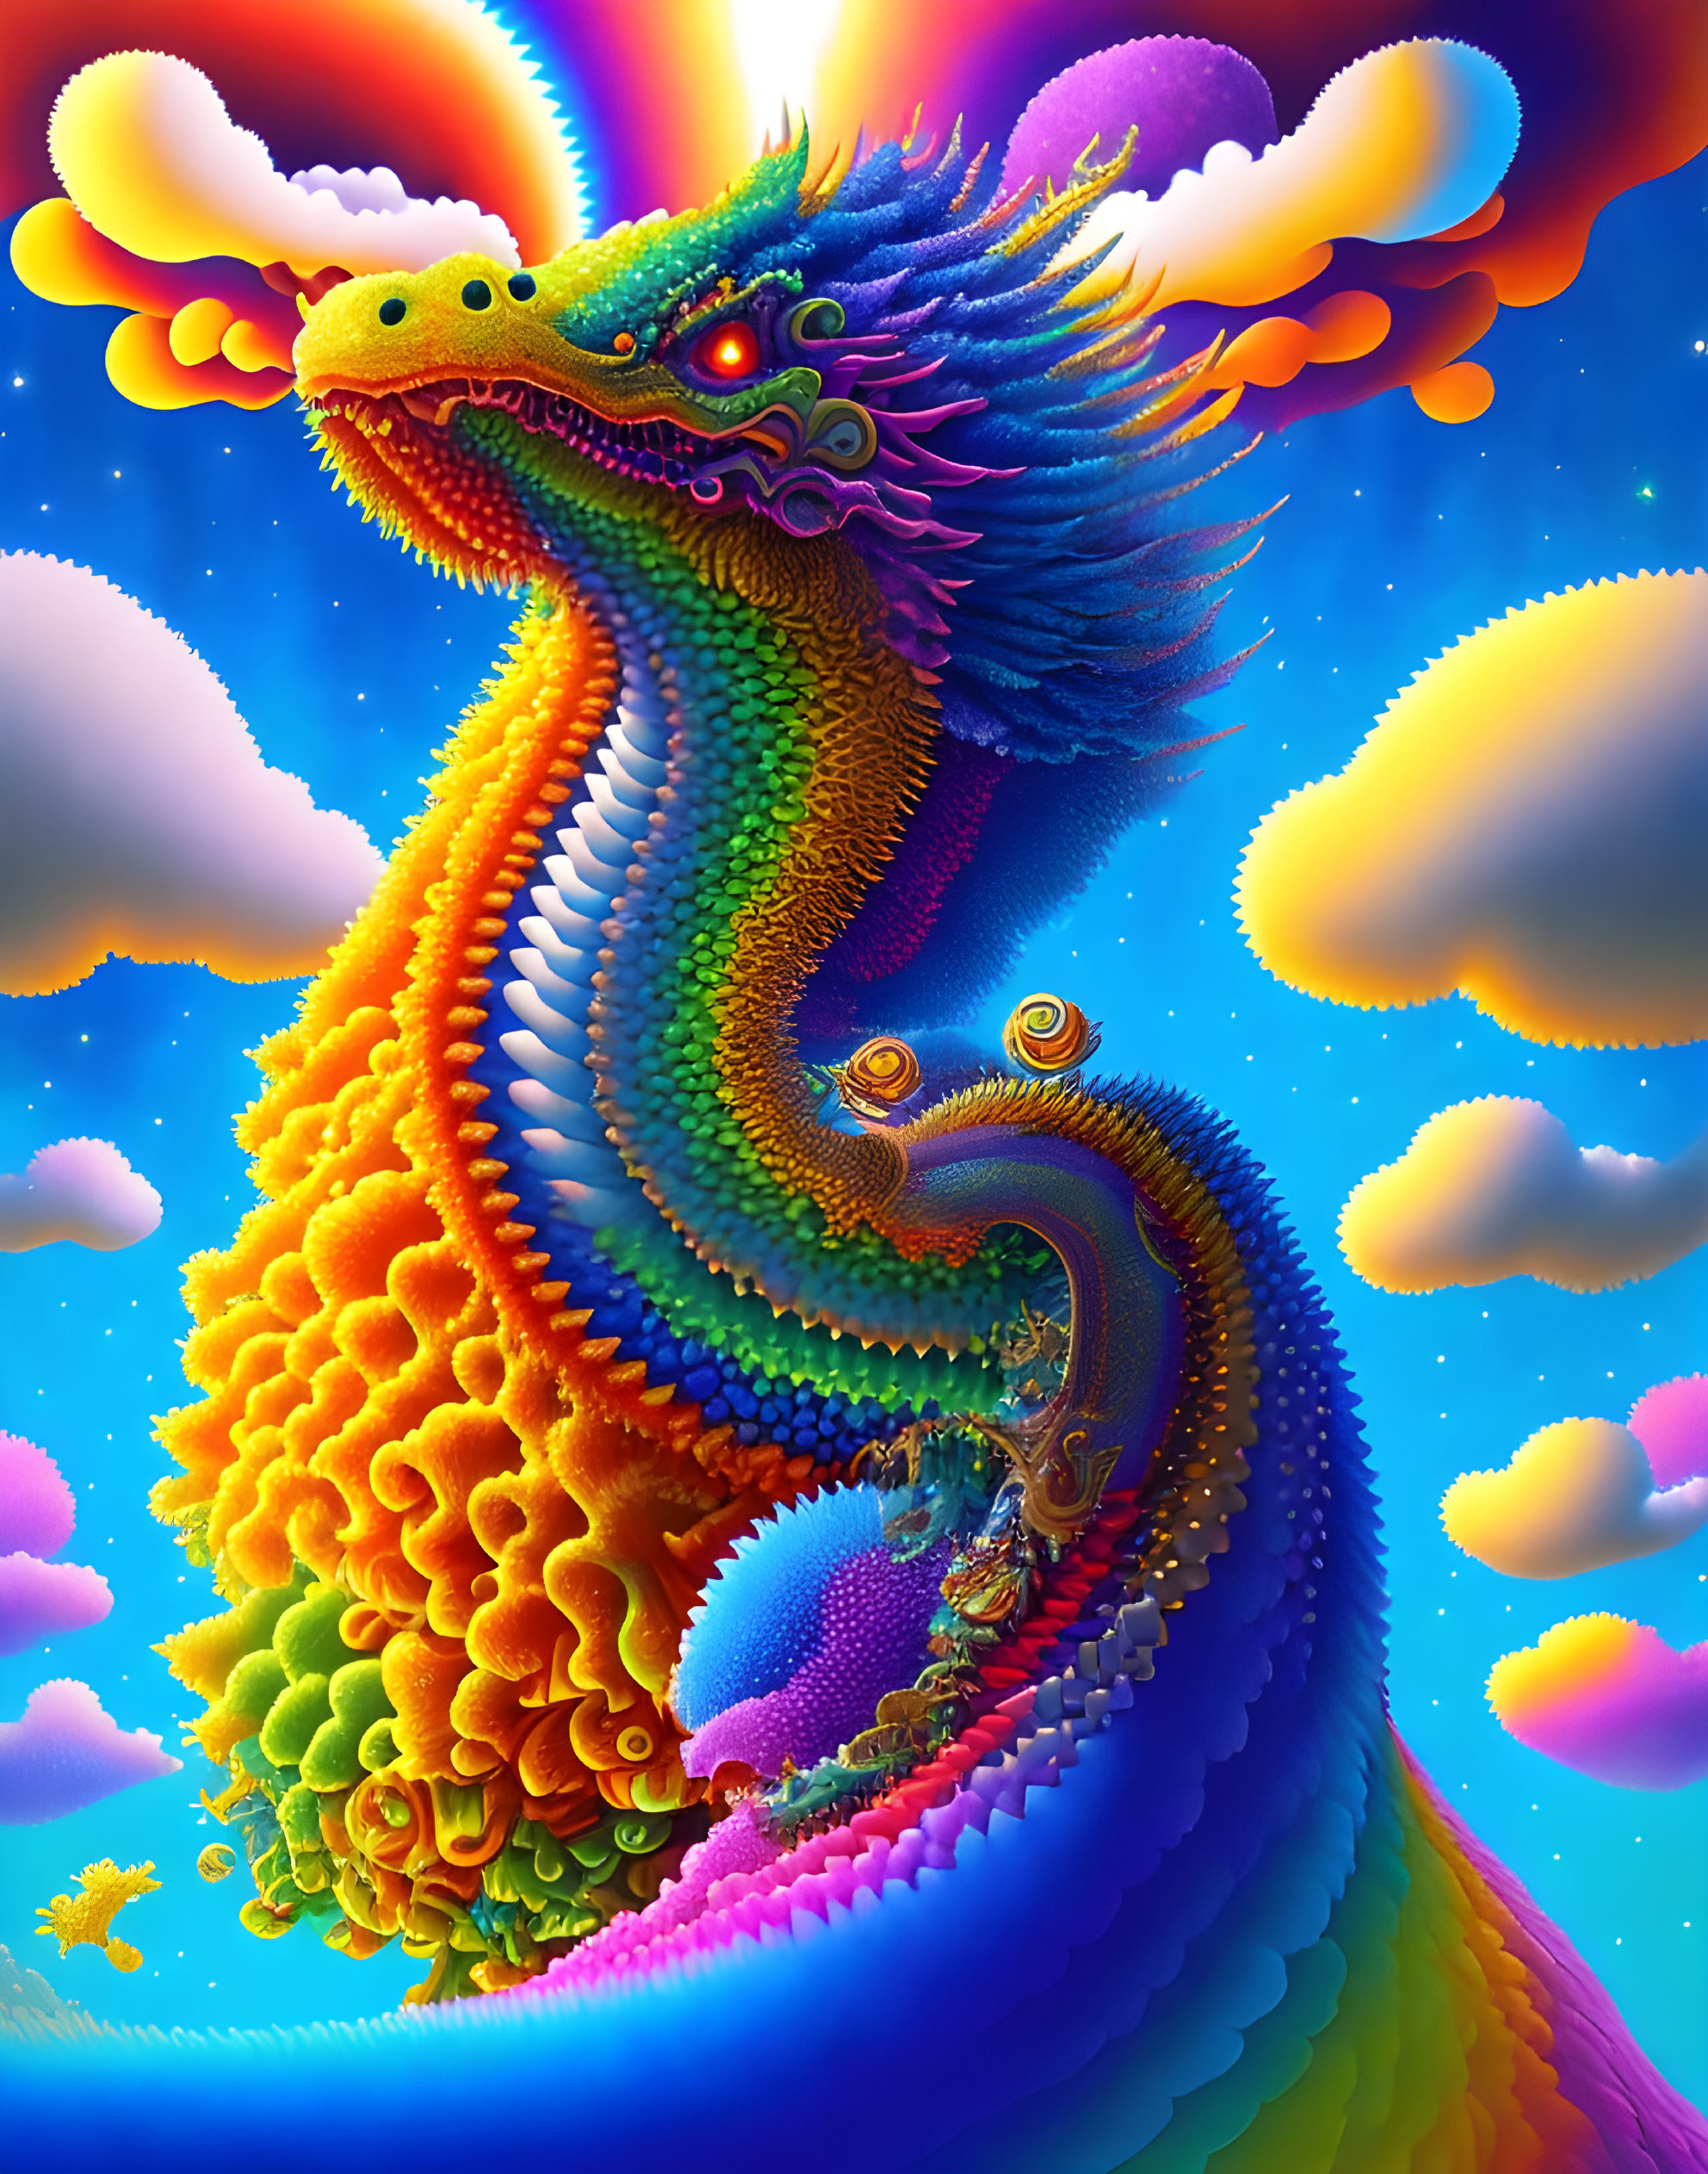 Colorful Chinese Dragon Illustration with Textures and Patterns in Psychedelic Sky